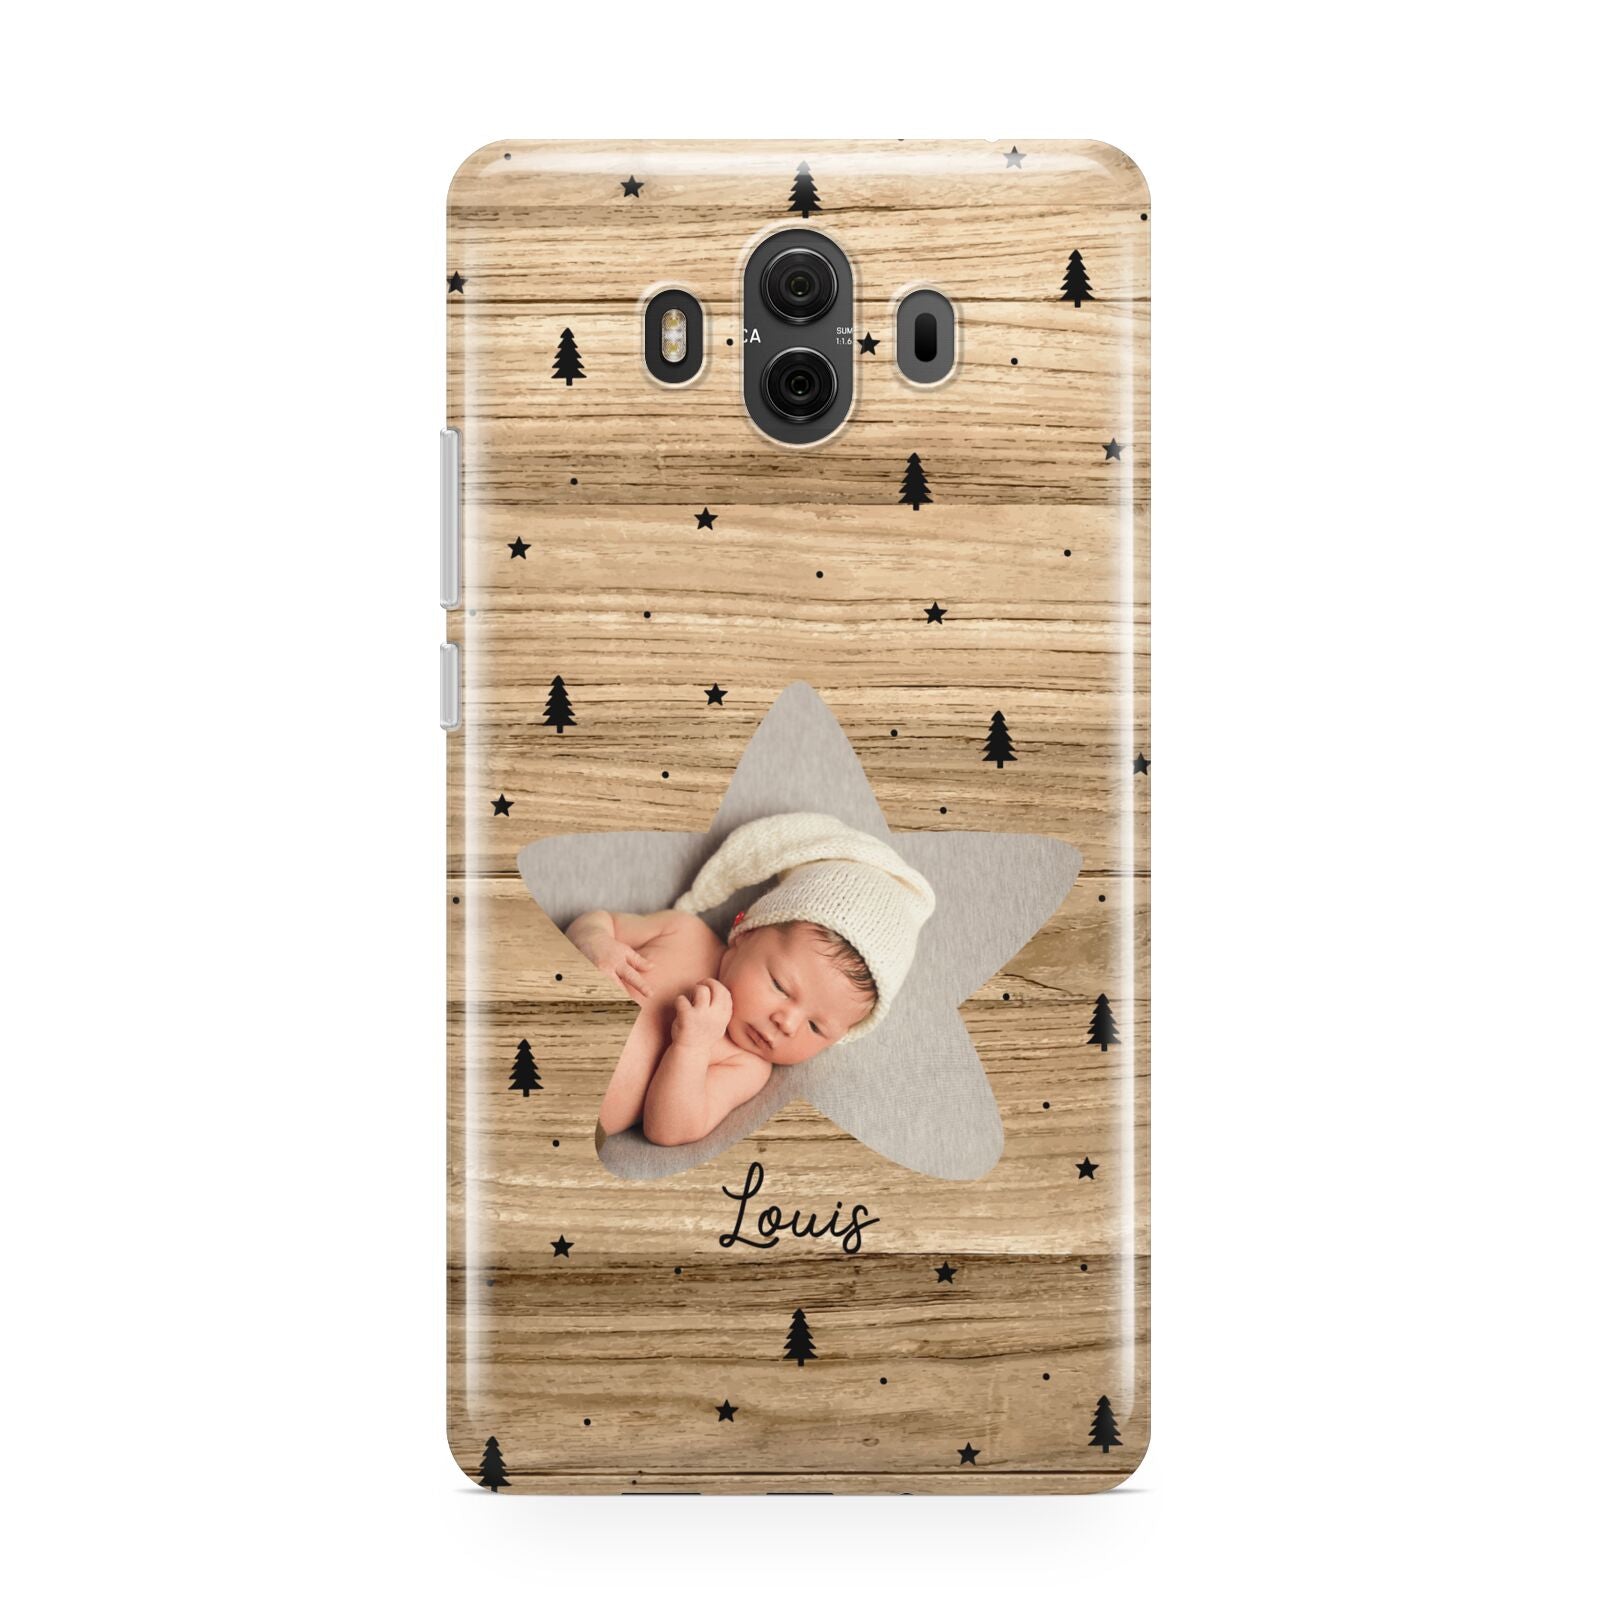 Baby Photo Upload Huawei Mate 10 Protective Phone Case